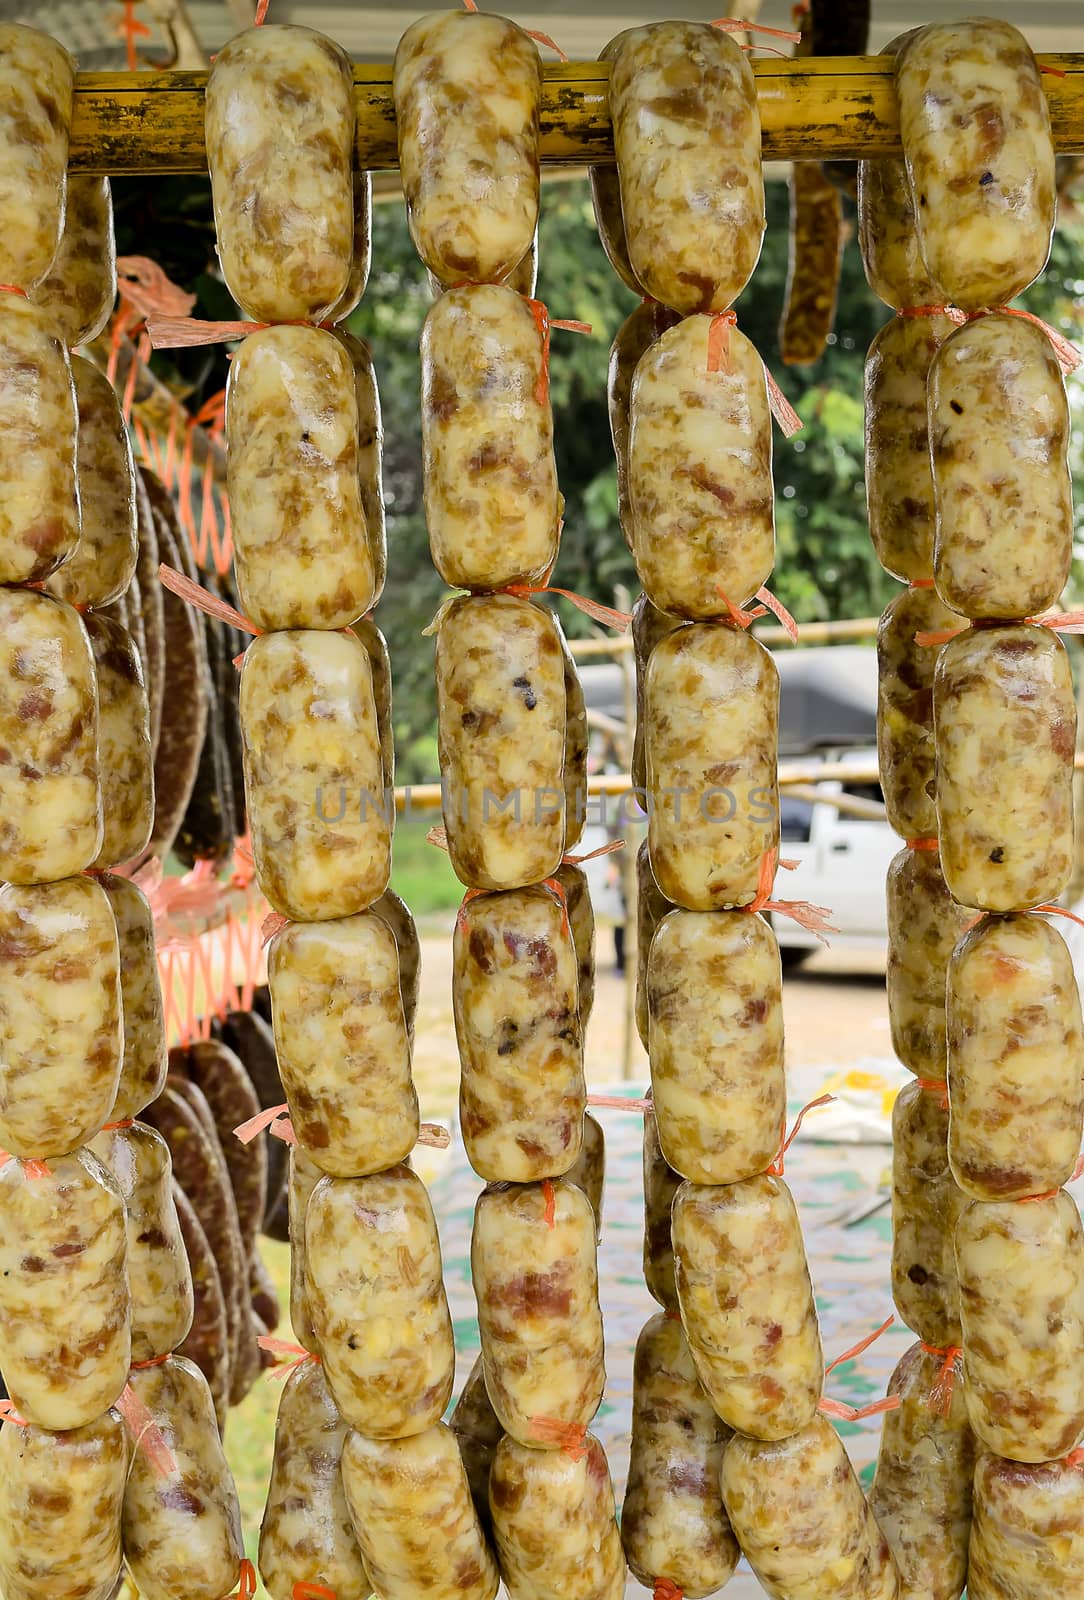 The local Sausage Food Preservation in Northern East of Thailand.